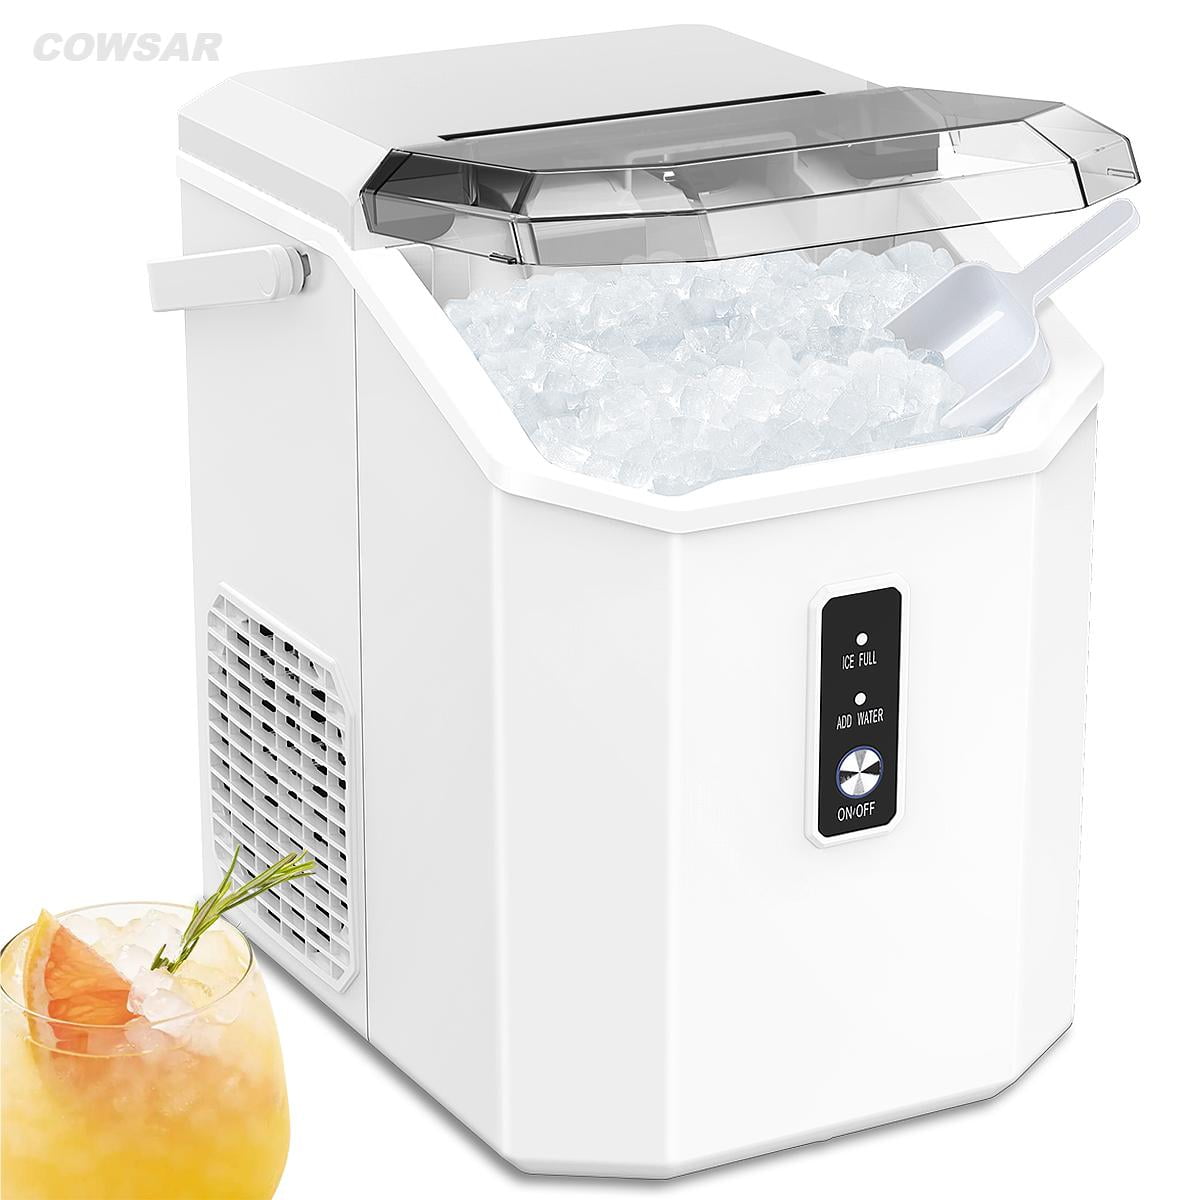 COWSAR Nugget Ice Maker Countertop, Chewable Pebble Ice 34Lbs Per Day,  Crunchy Pellet Ice Cubes Maker Machine with Self Cleaning, Compact Portable  Design for Home/Kitchen/RV/Office 34LBS / 24H Nugget Ice-Black 1 for